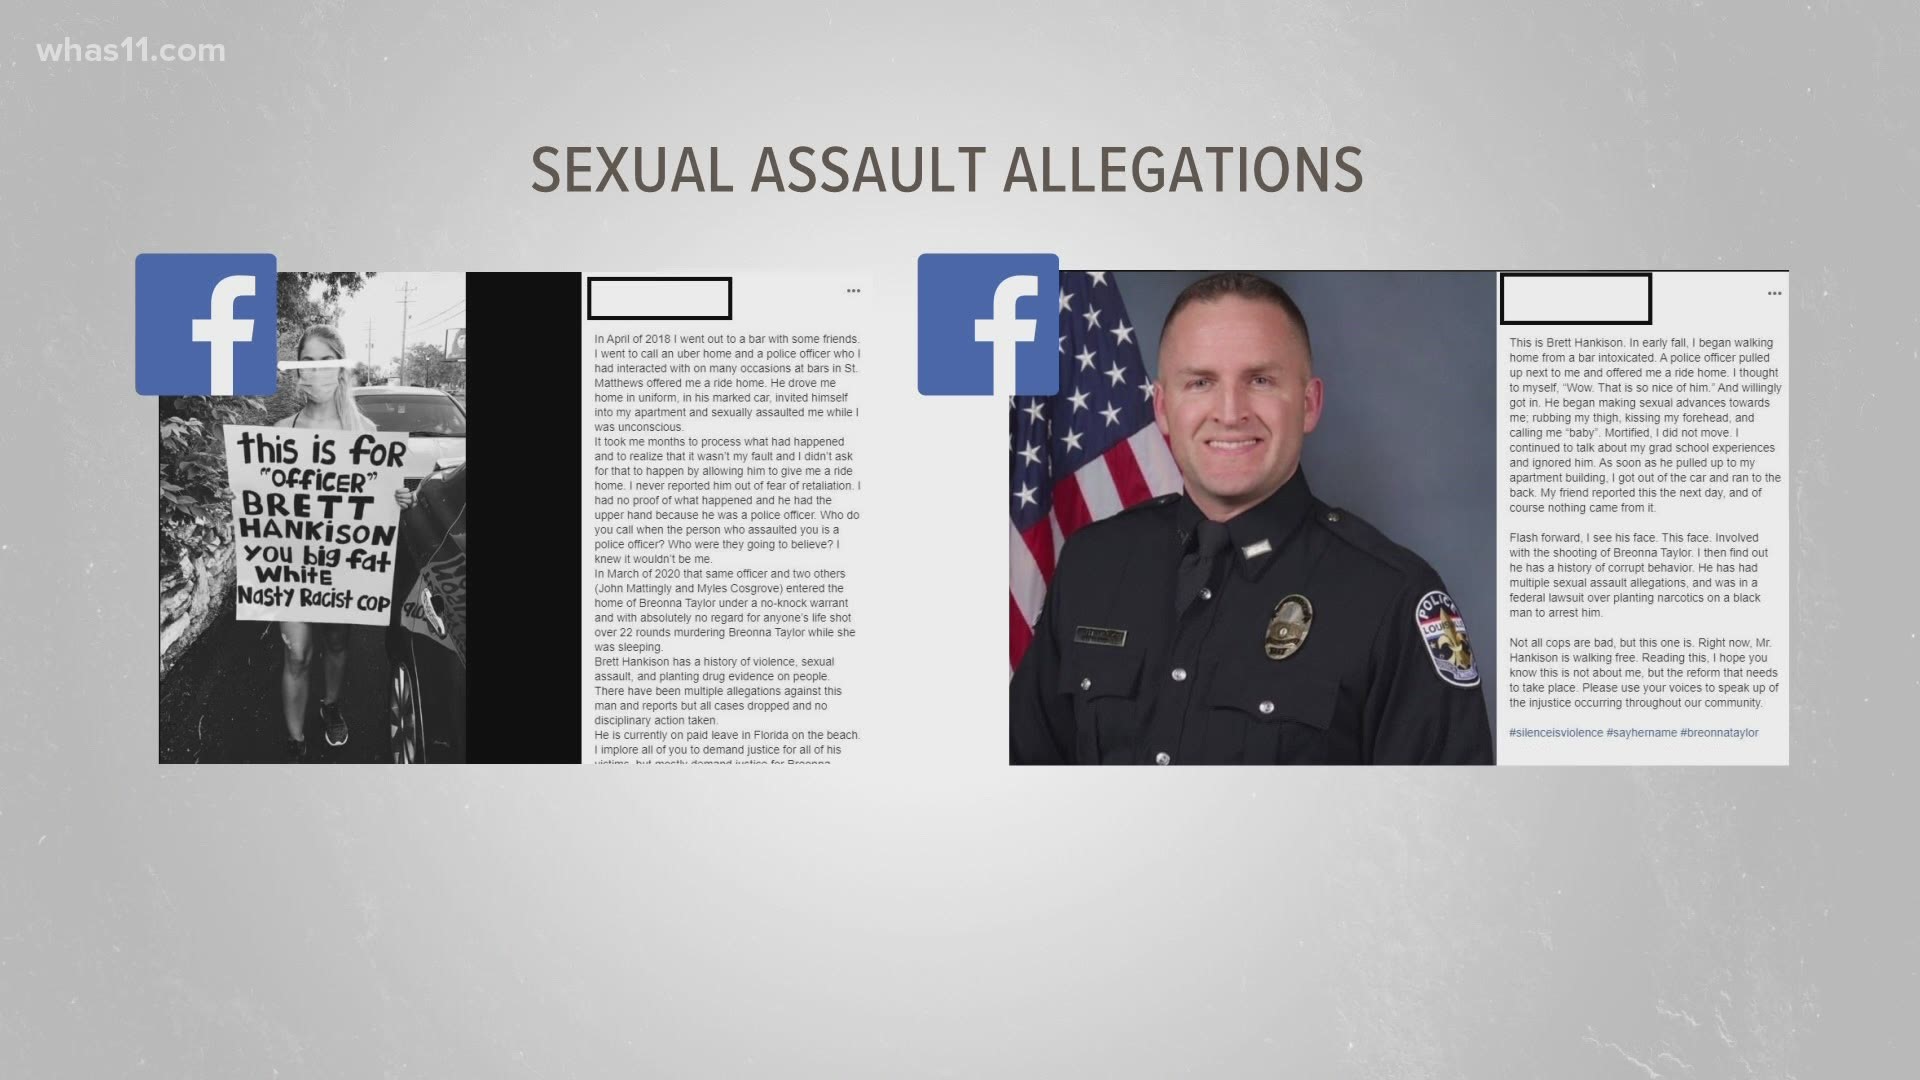 Several women have come forward with accusations of sexual assault against LMPD officer Brett Hankison, one of the officers involved in the Breonna Taylor shooting.